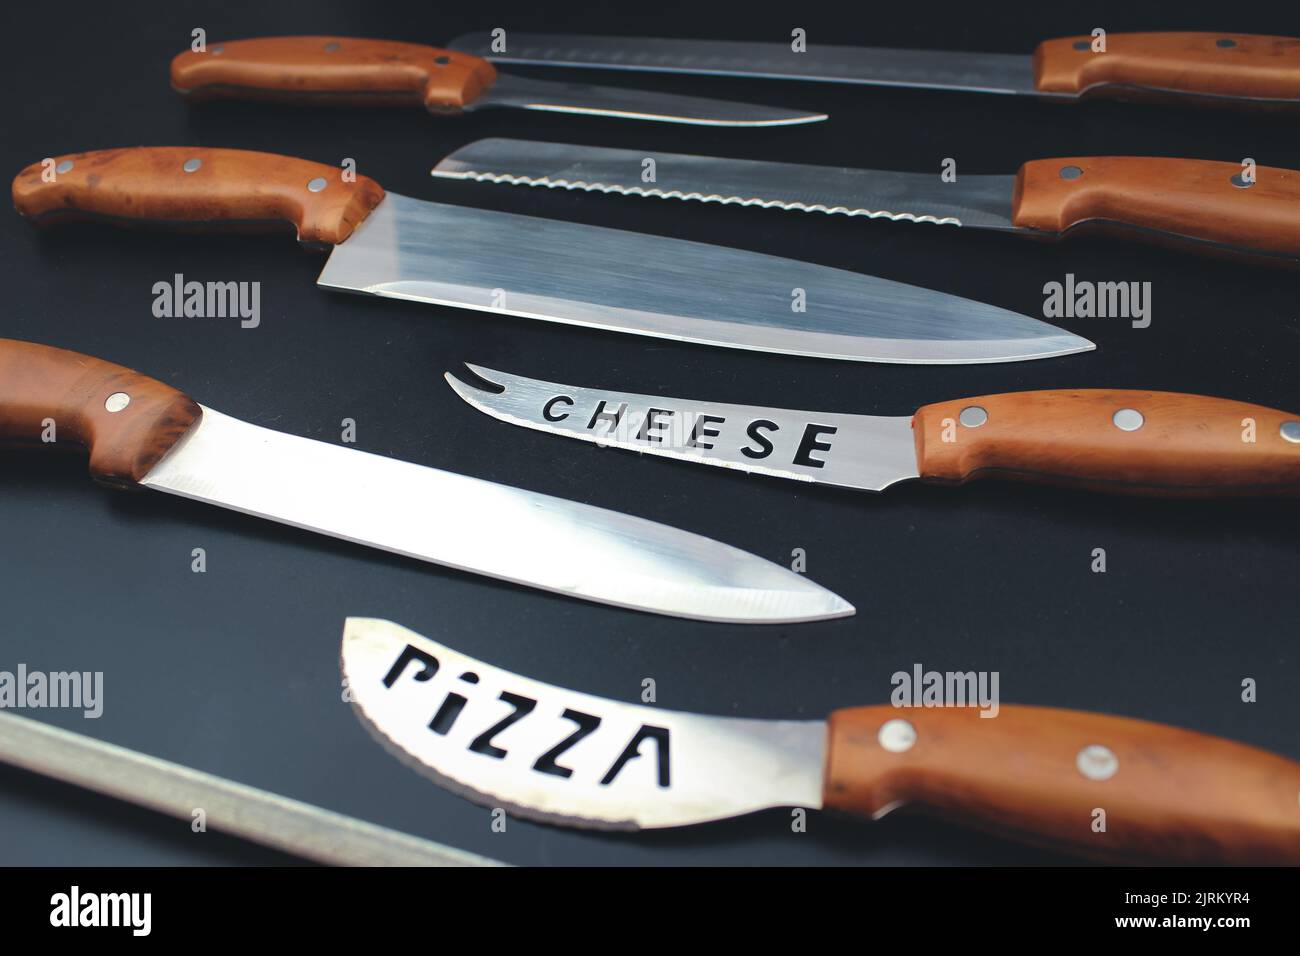 Set of kitchen knives with wooden handle, top view, close up. Stock Photo